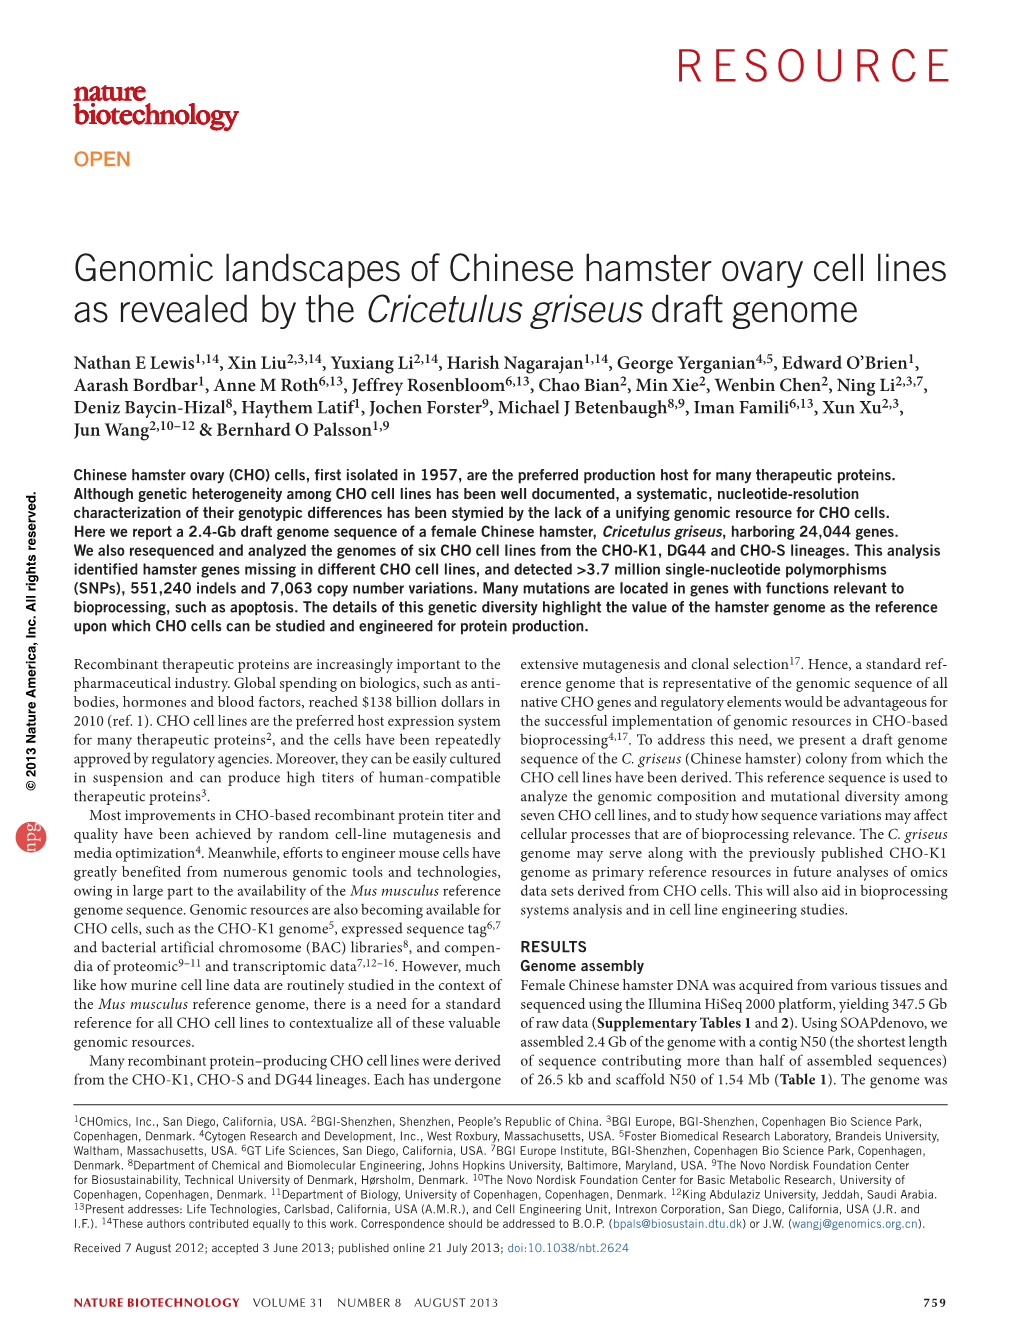 Genomic Landscapes of Chinese Hamster Ovary Cell Lines As Revealed by the Cricetulus Griseus Draft Genome